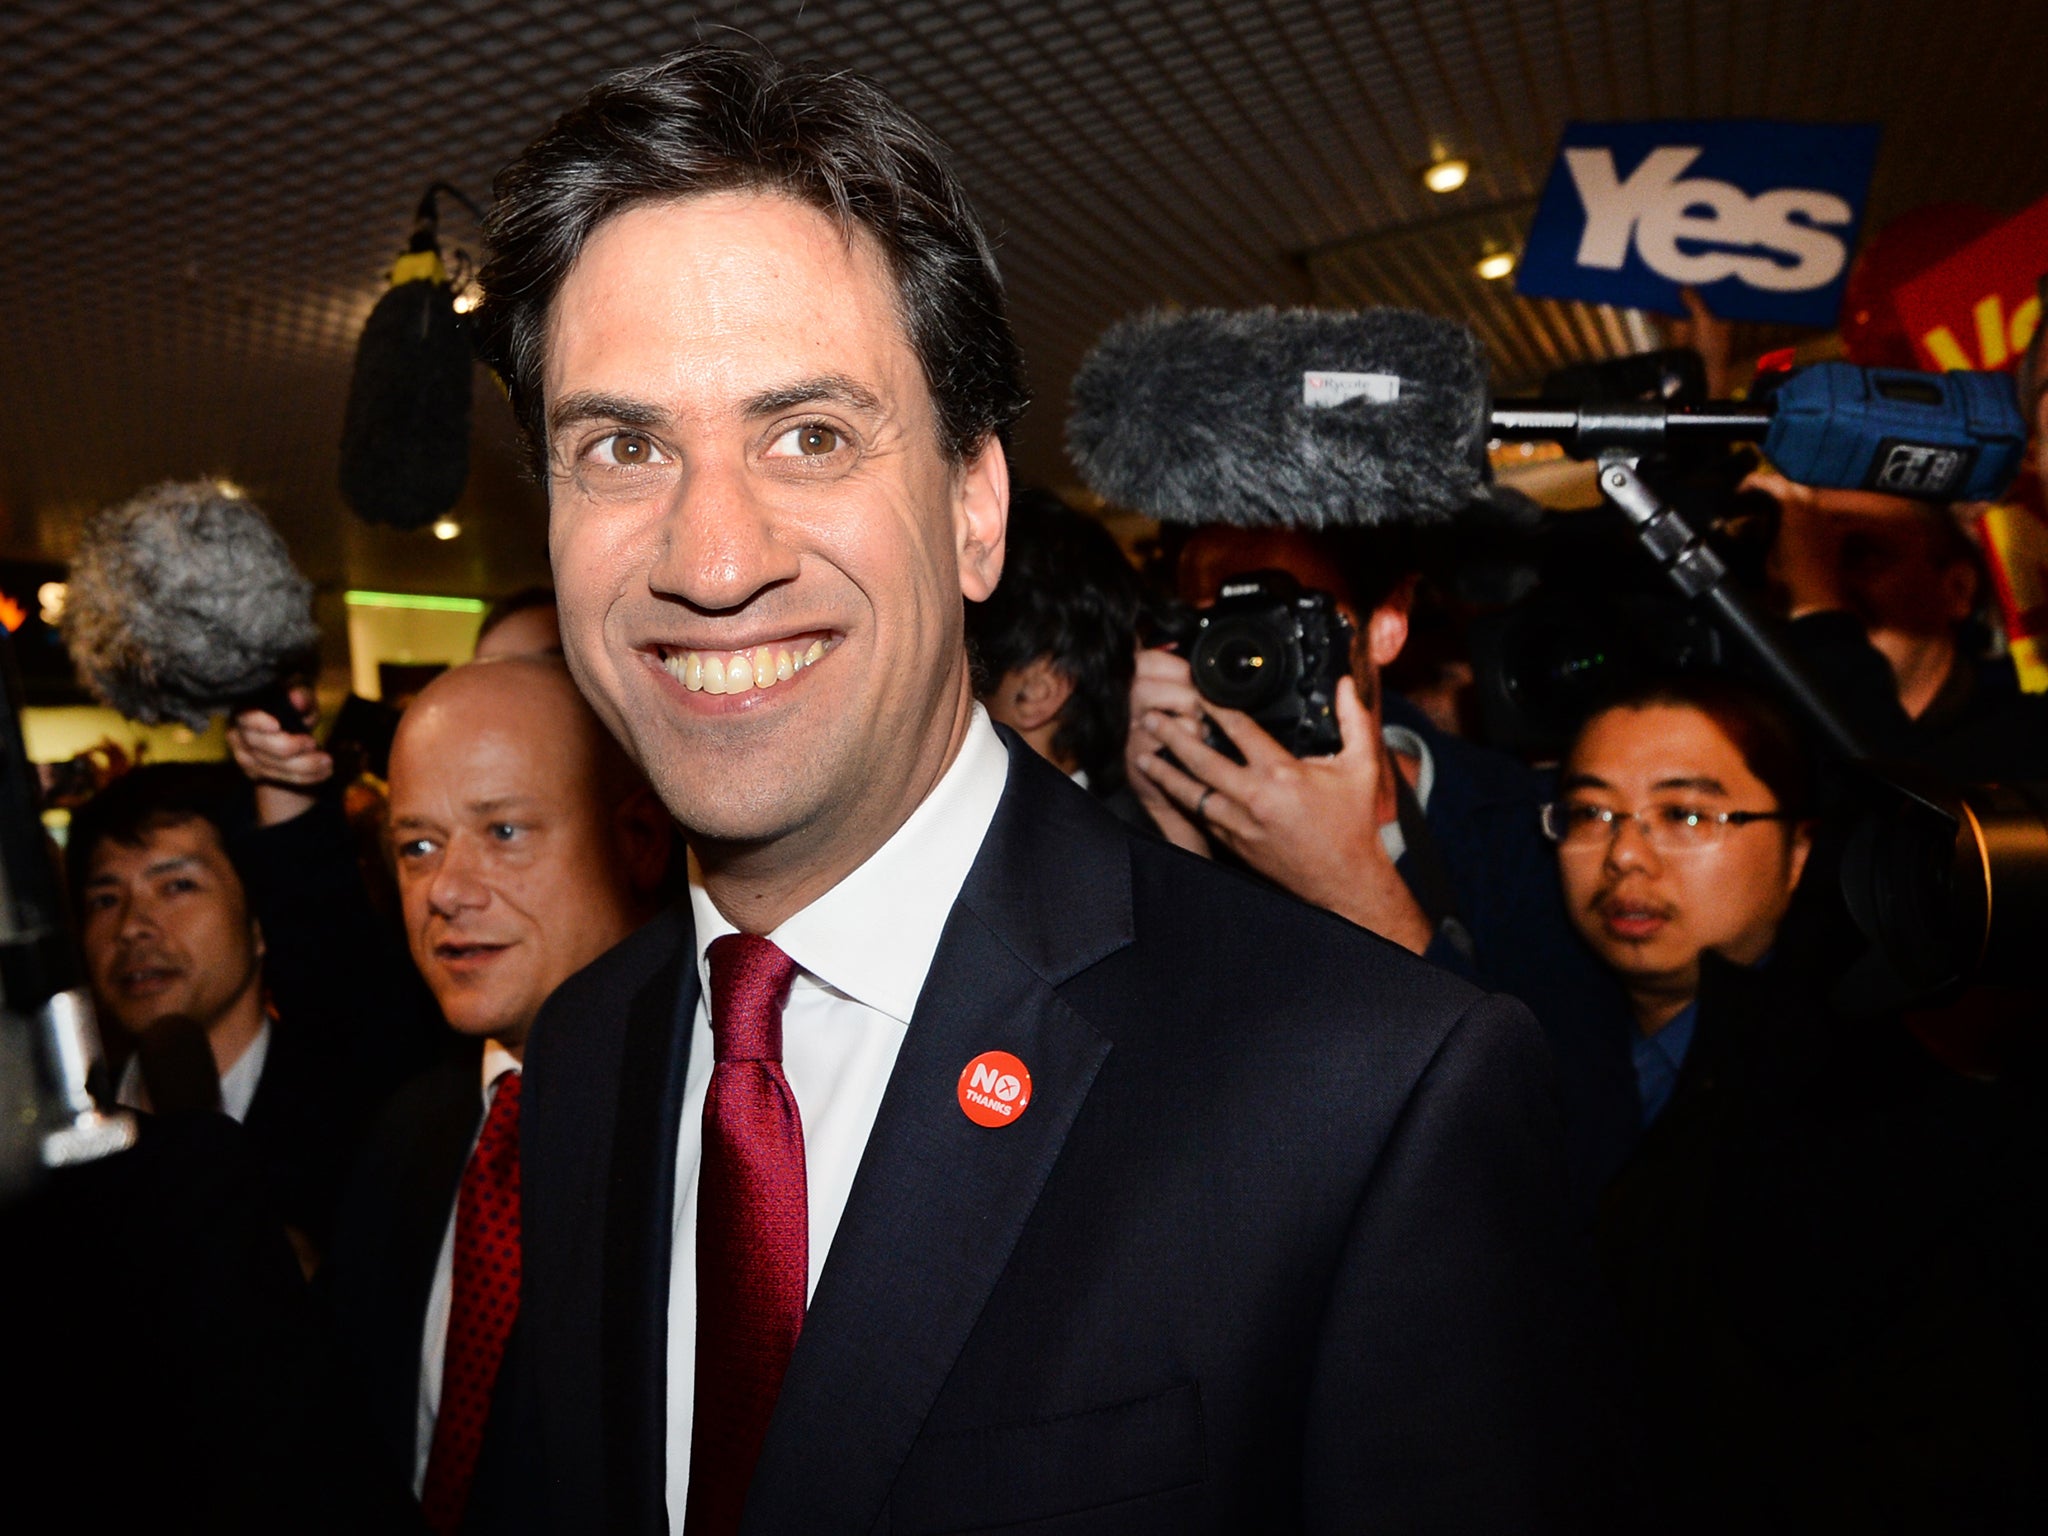 Labour leader Ed Miliband makes his way through St James Shopping Centre in Edinburgh while on the campaign trail for the Scottish independence referendum